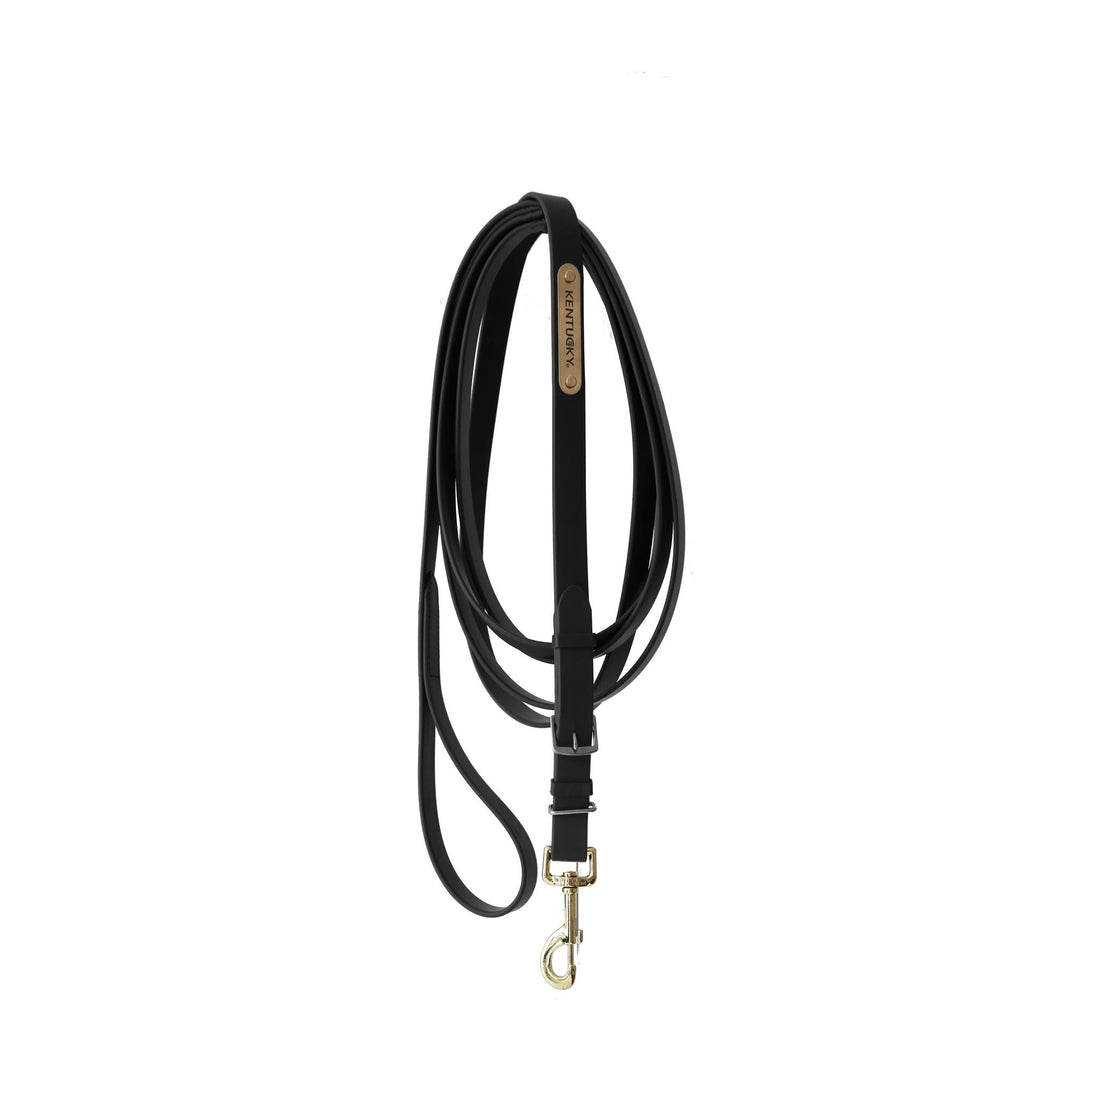 The Kentucky stallion lead is the perfect lead reign for any lively horse. With 4 metres in length it gives you plenty of control. 